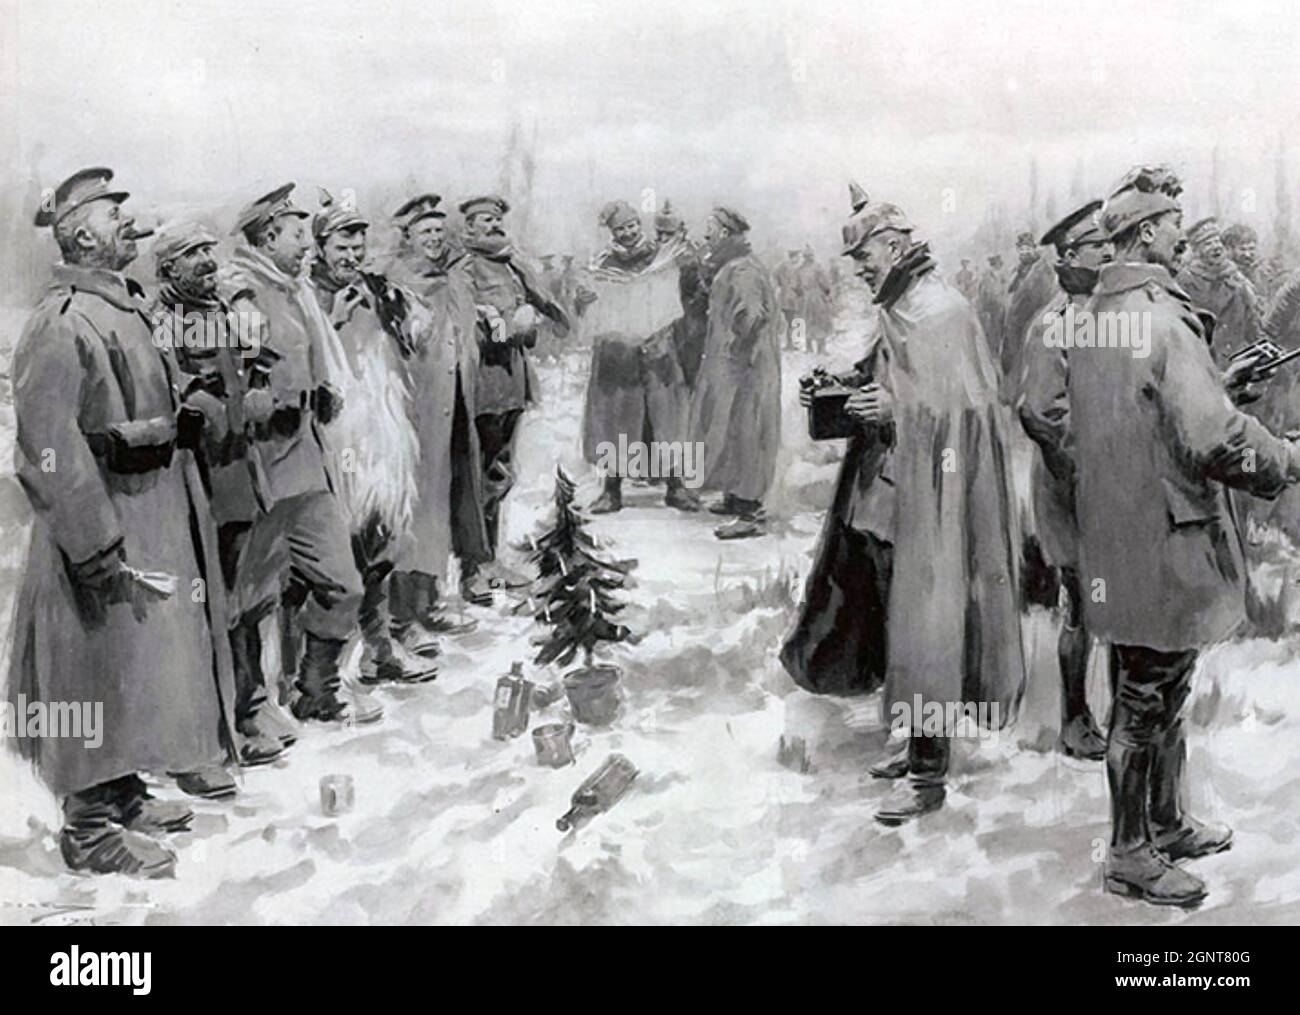 CHRISTMAS TRUCE 24-26 December 1914. One of several unofficial First World War truces at this period. Illustration from the Illustrated London News 9 January 1915. Stock Photo